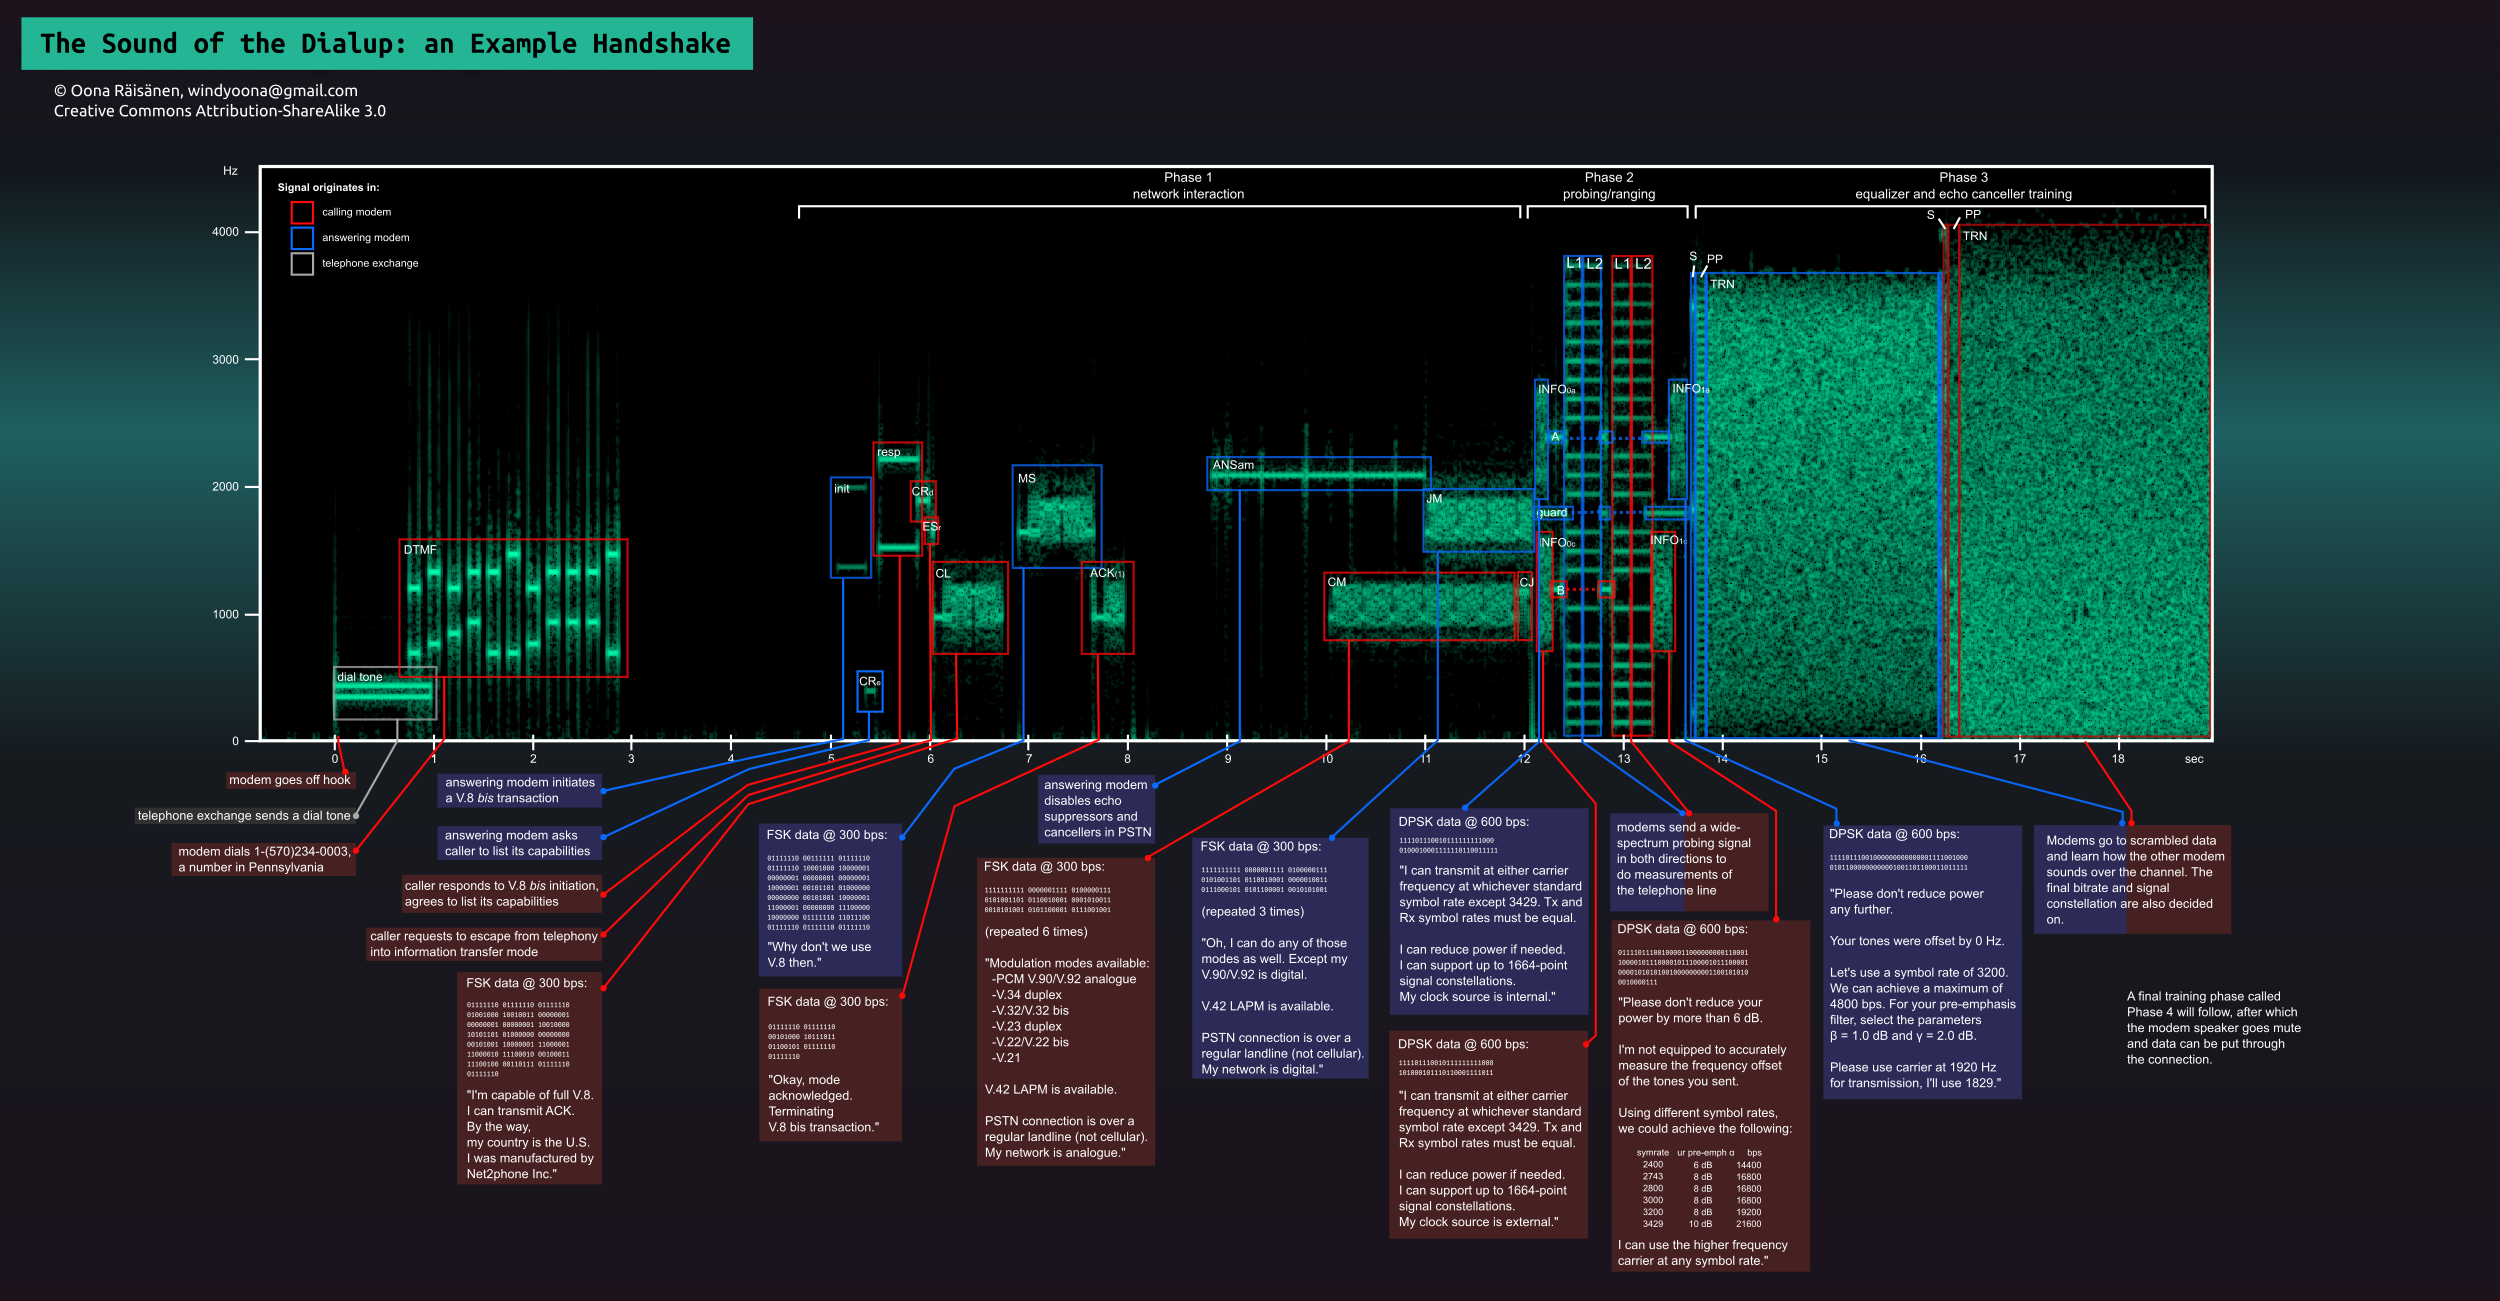 The sound of dialup, pictured